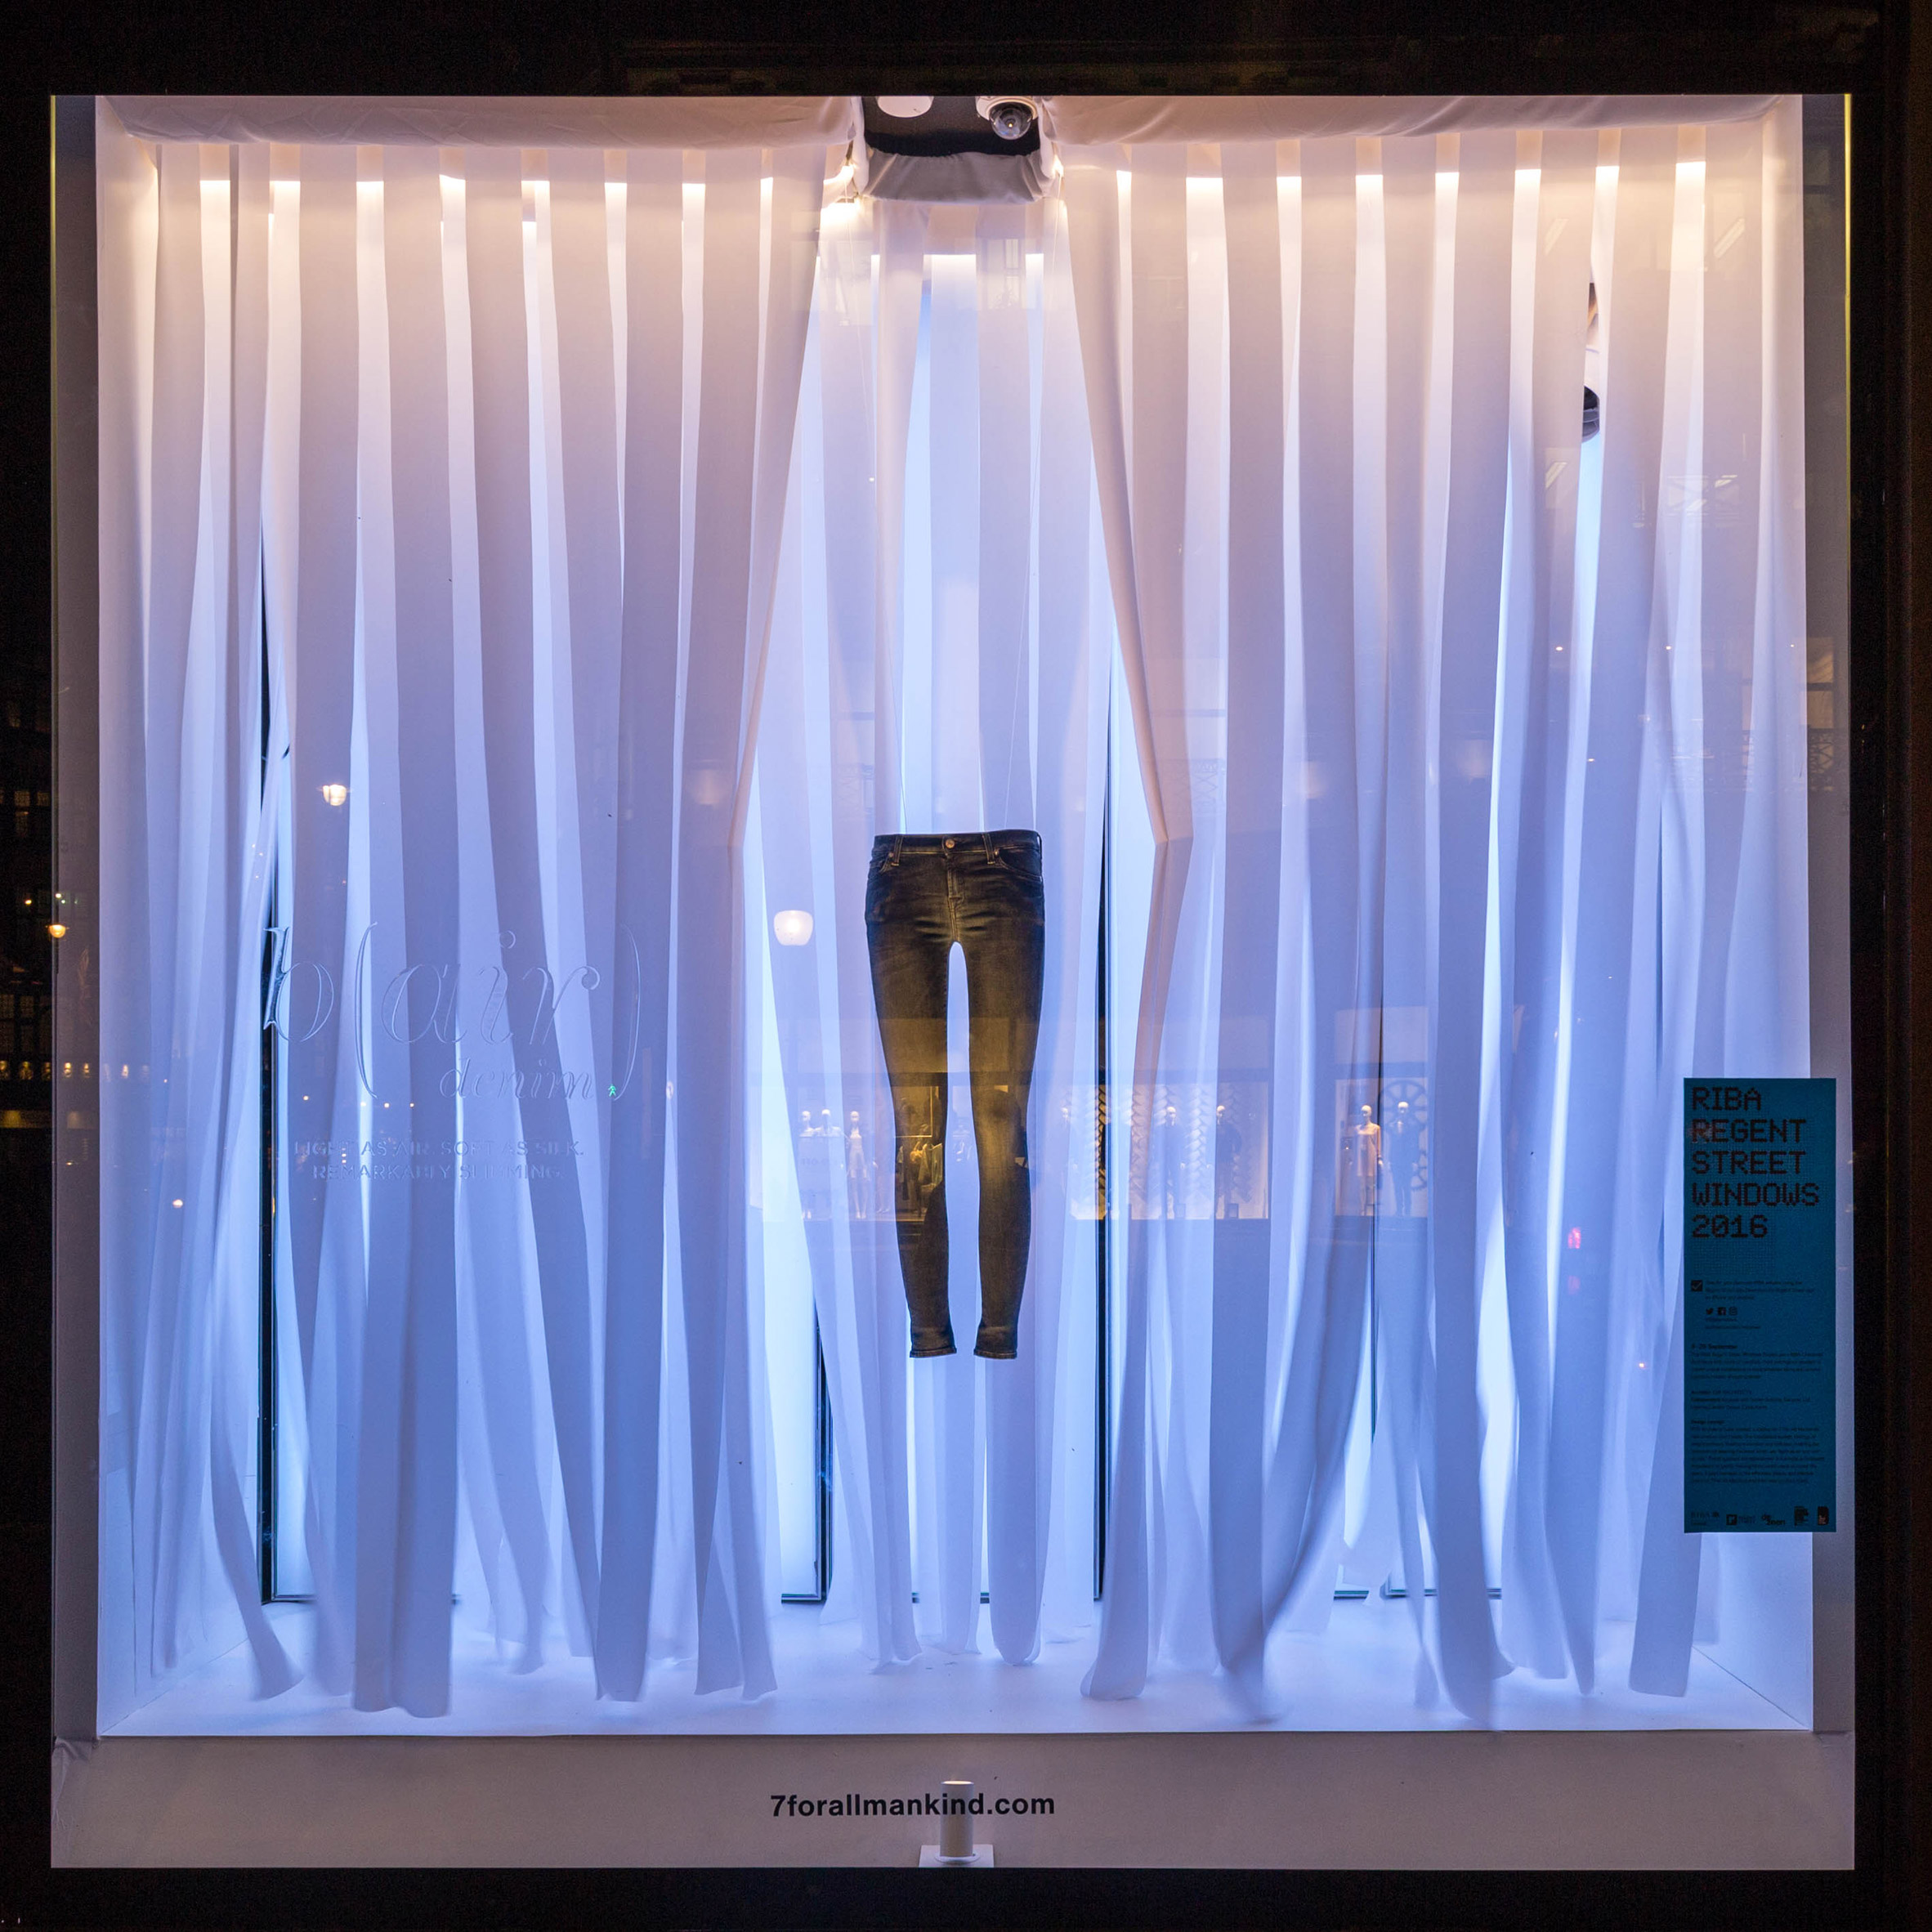 7 For All Mankind RIBA window display 2016 with KSR Architects